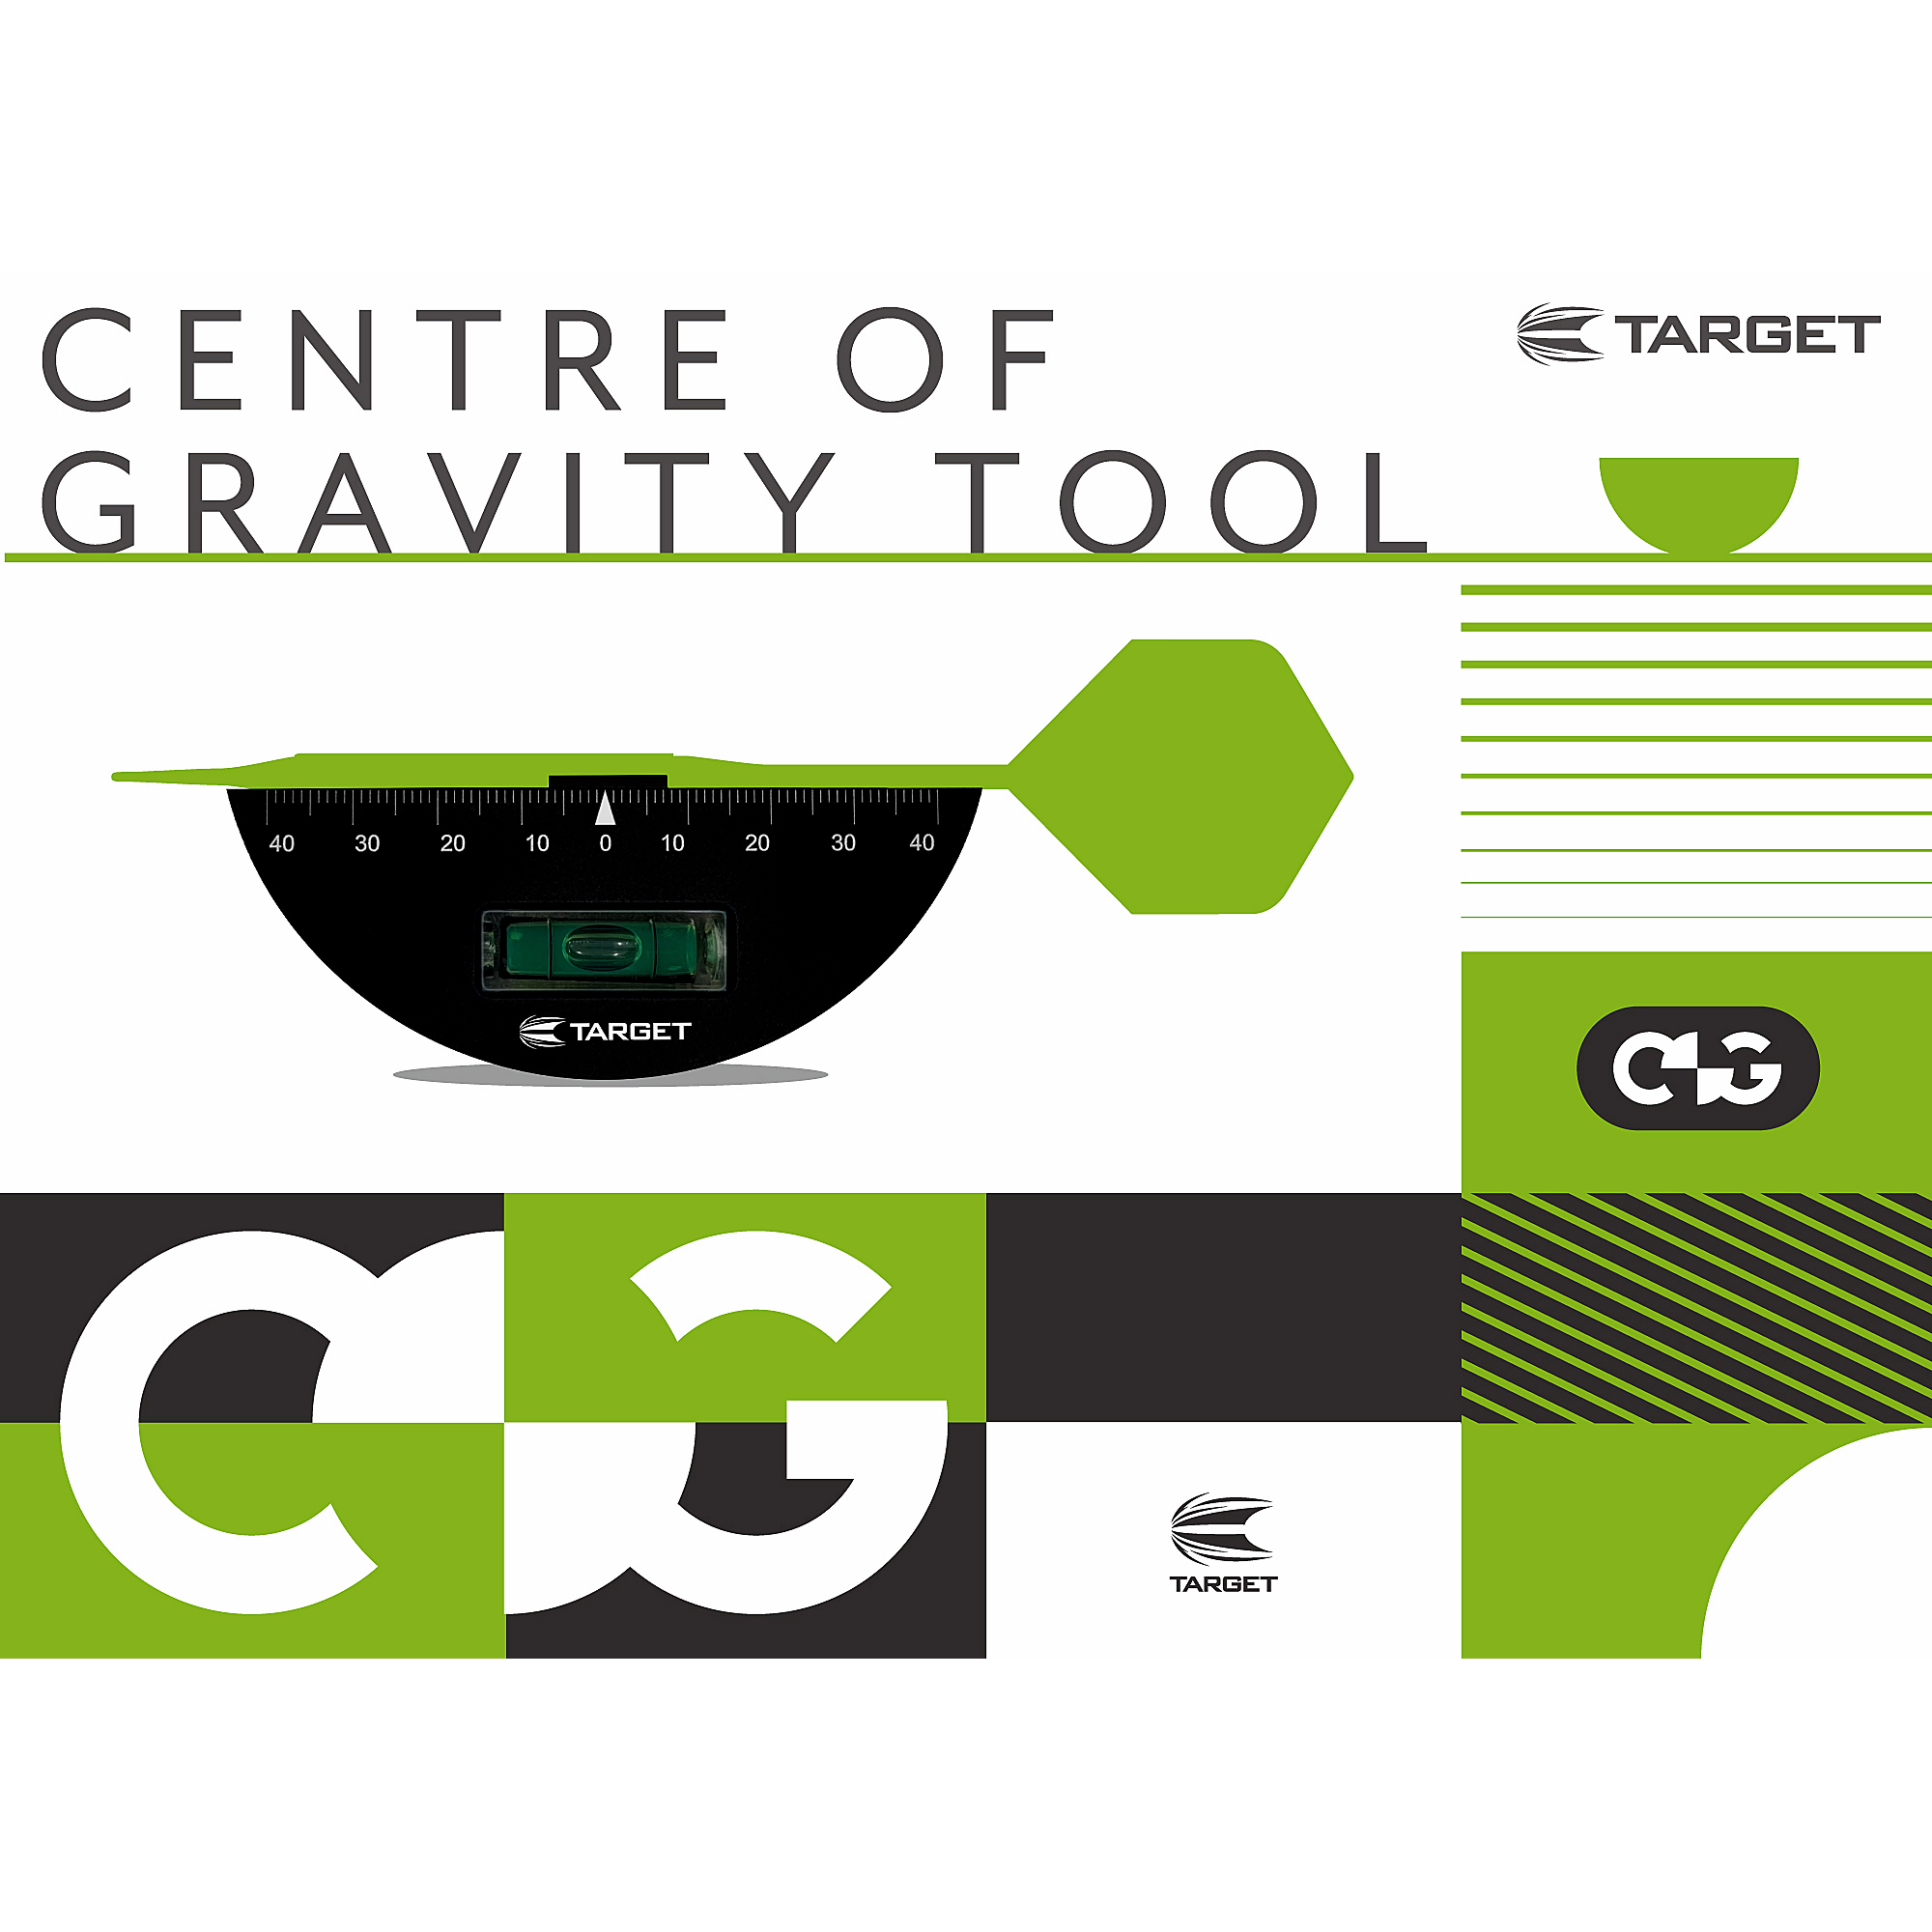 Target - Centre of Gravity Tool